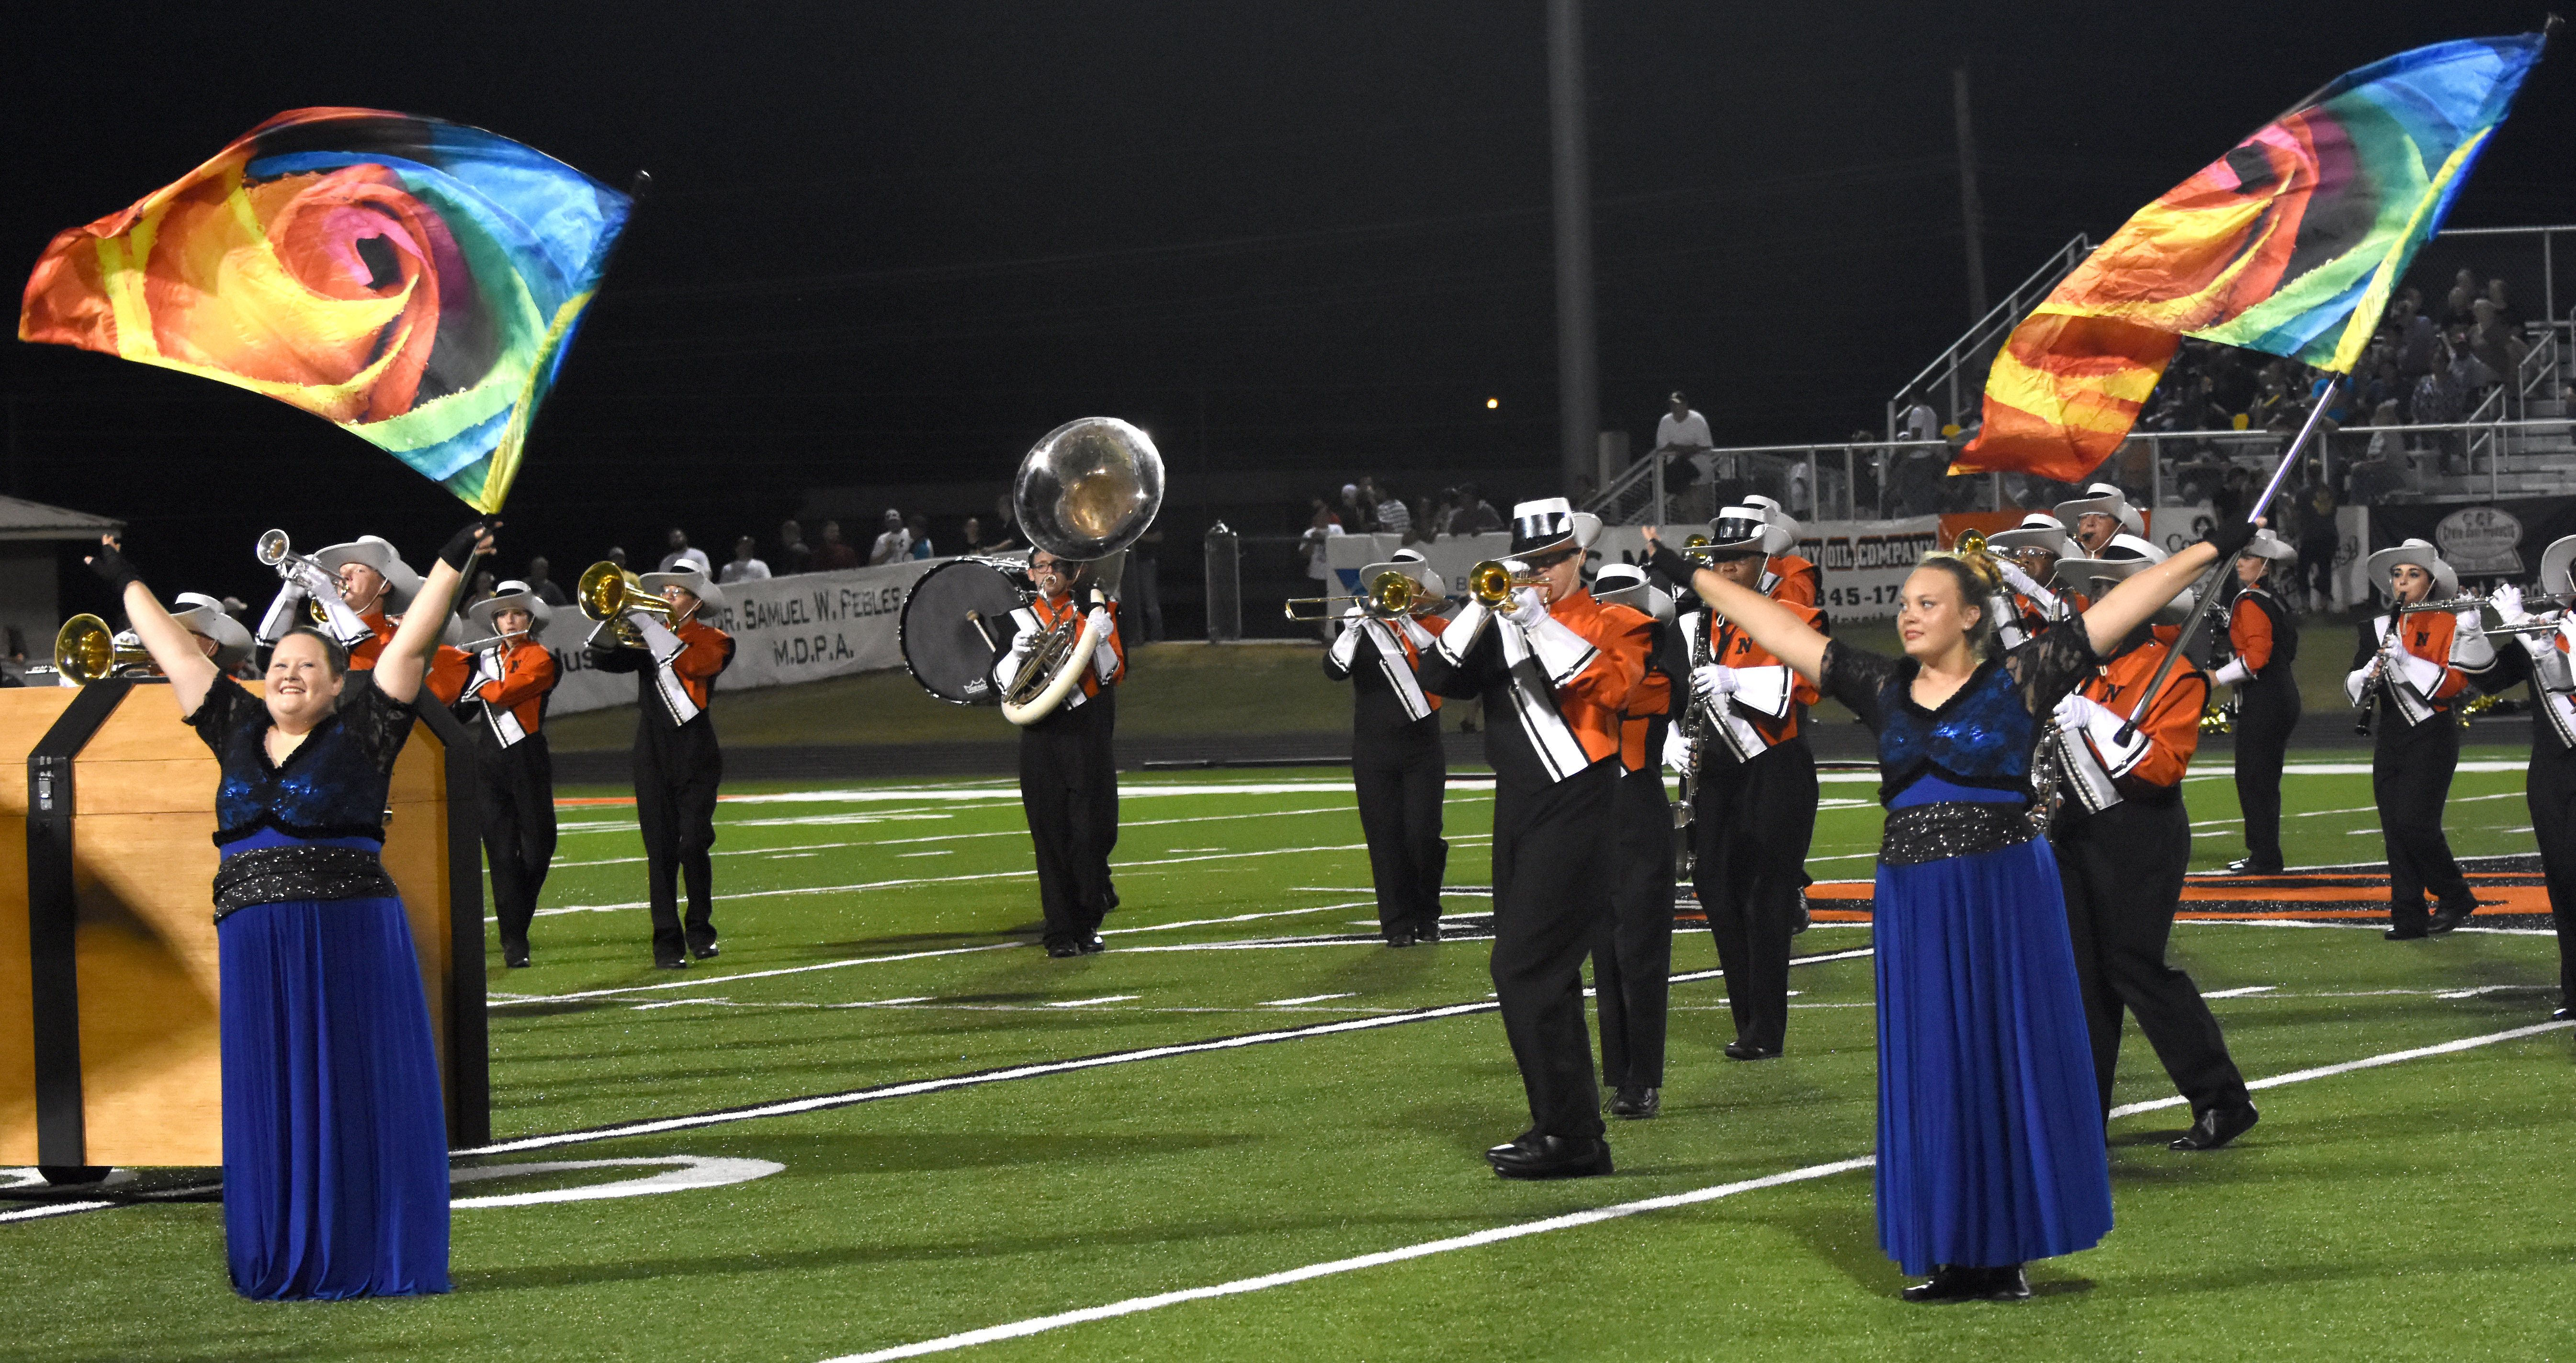 The Scrapper band performs during halftime Friday night at Scrapper Stadium.